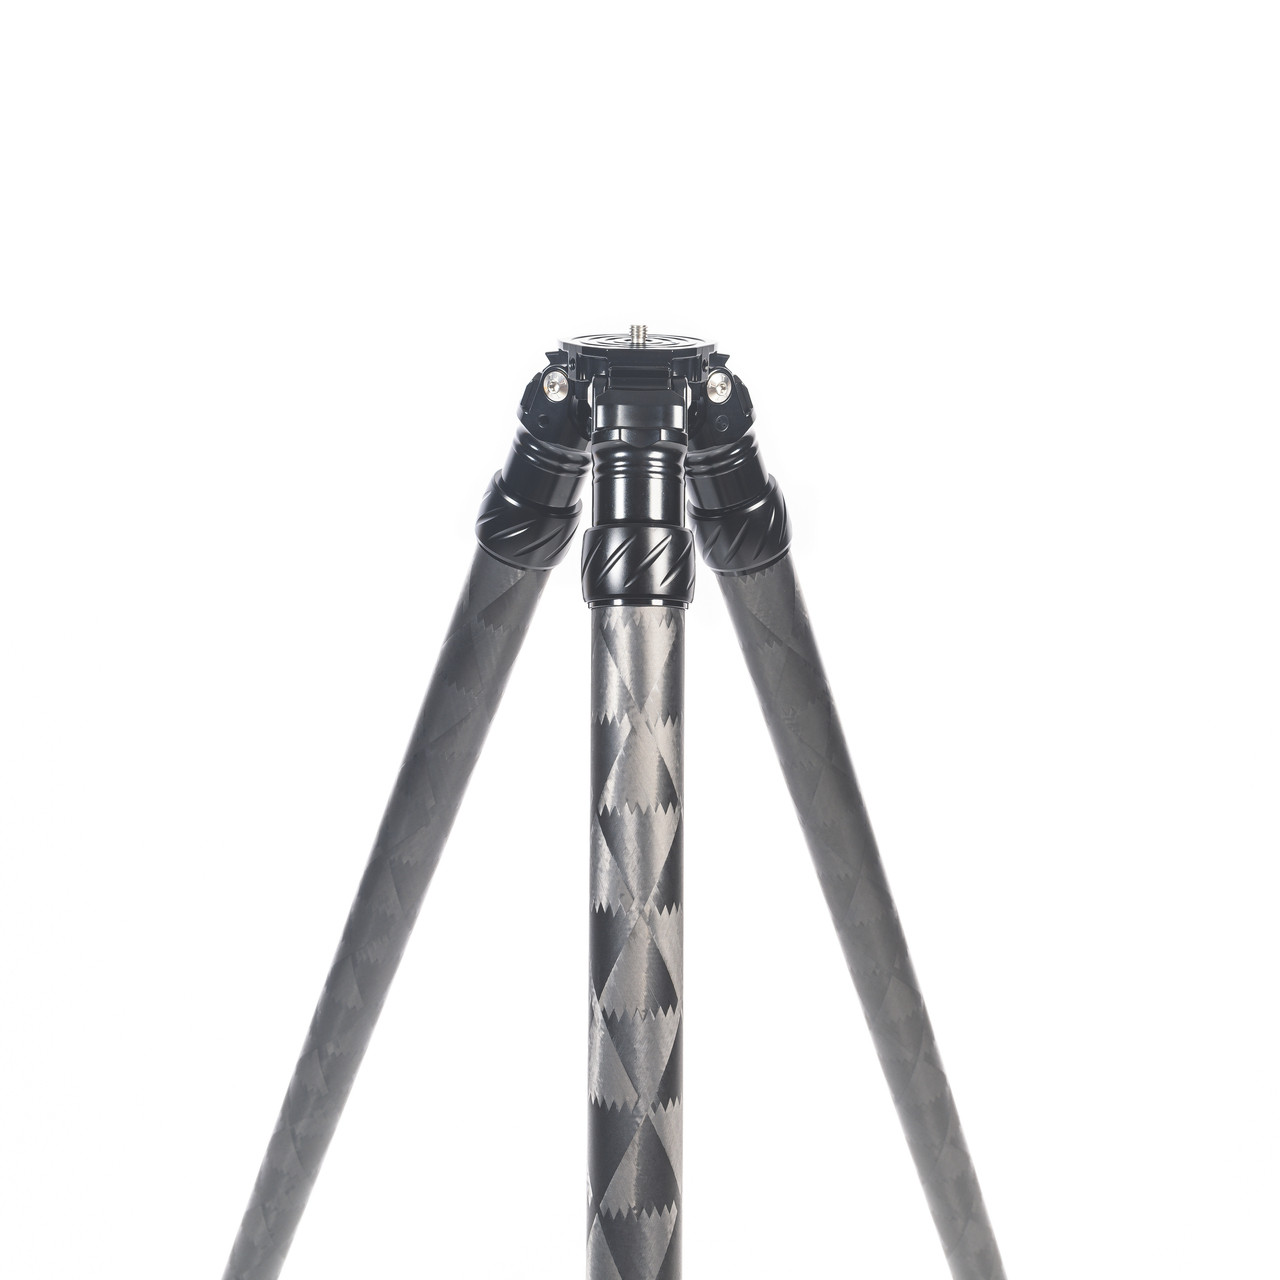 The twist locks of the Two Vets QDT V2 LS I tripod are near the top for quick and easy deployment